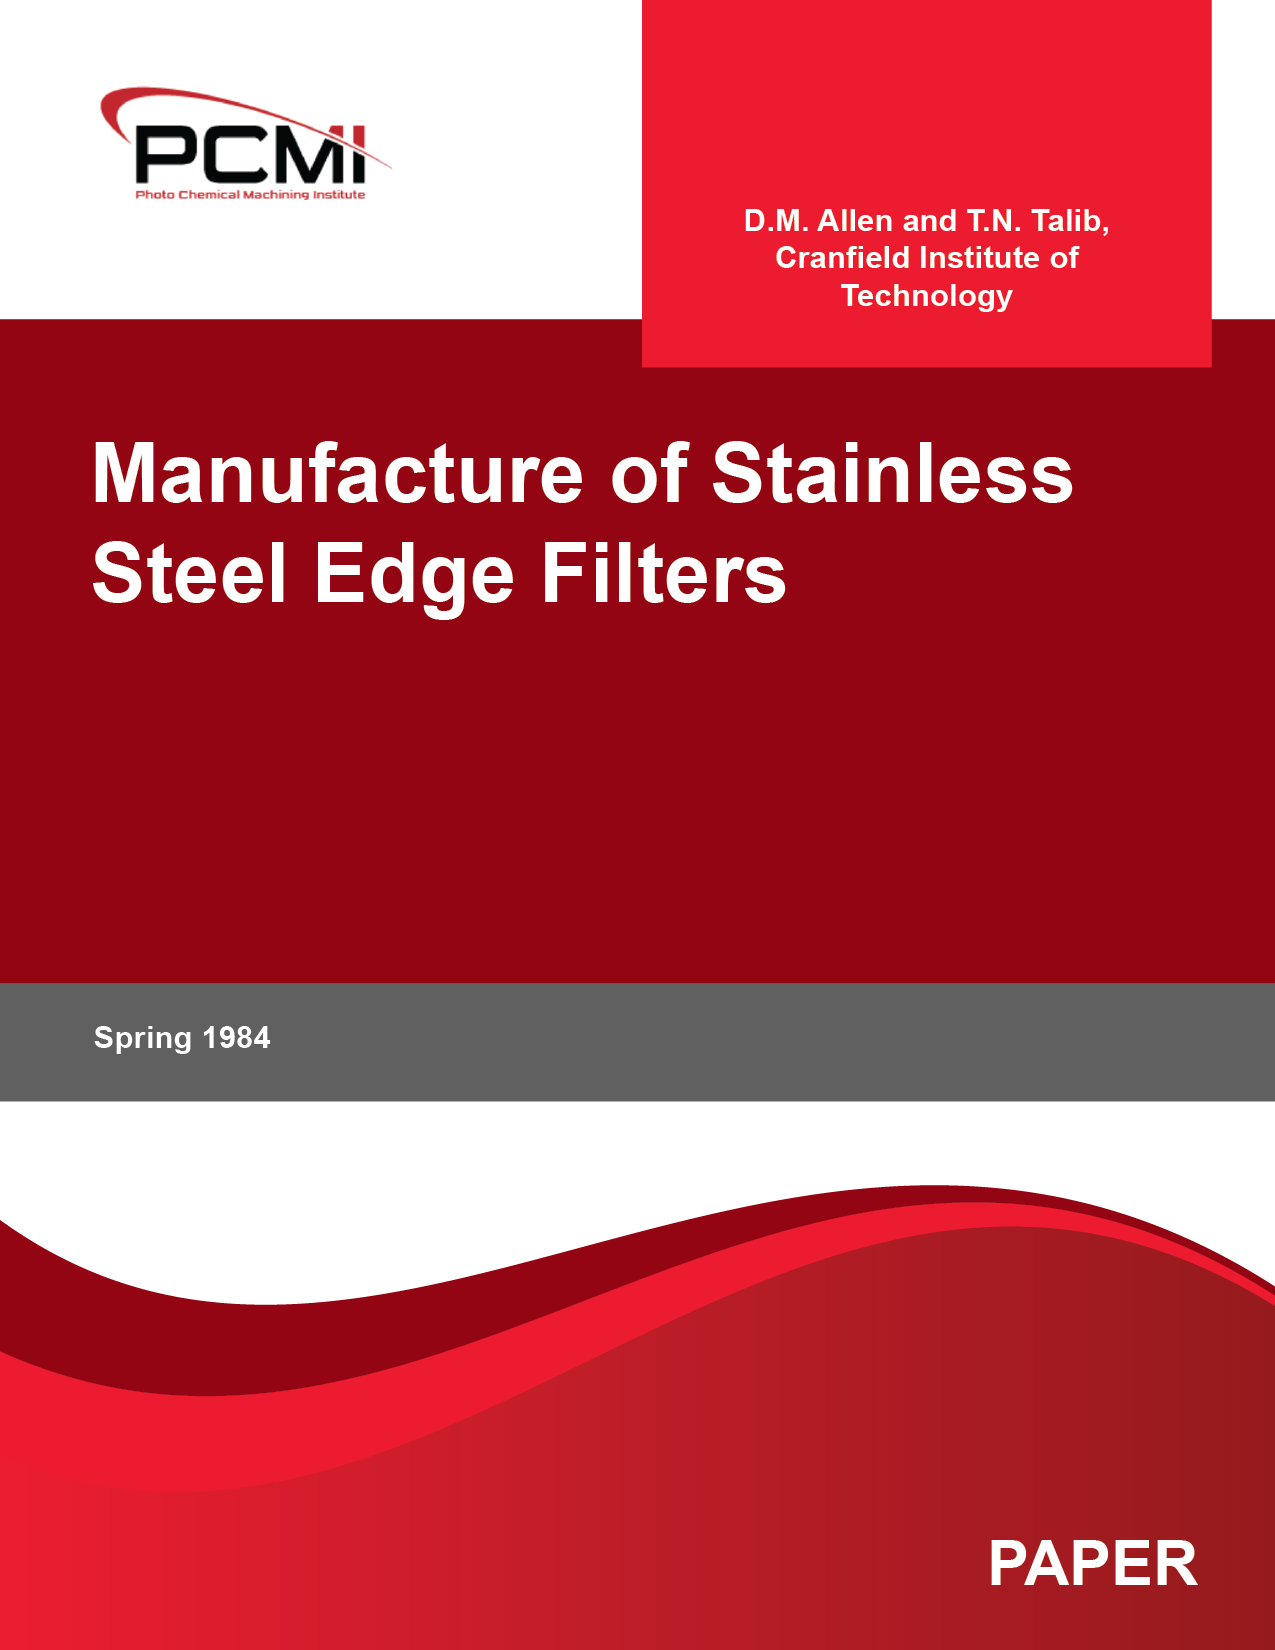 Manufacture of Stainless Steel Edge Filters